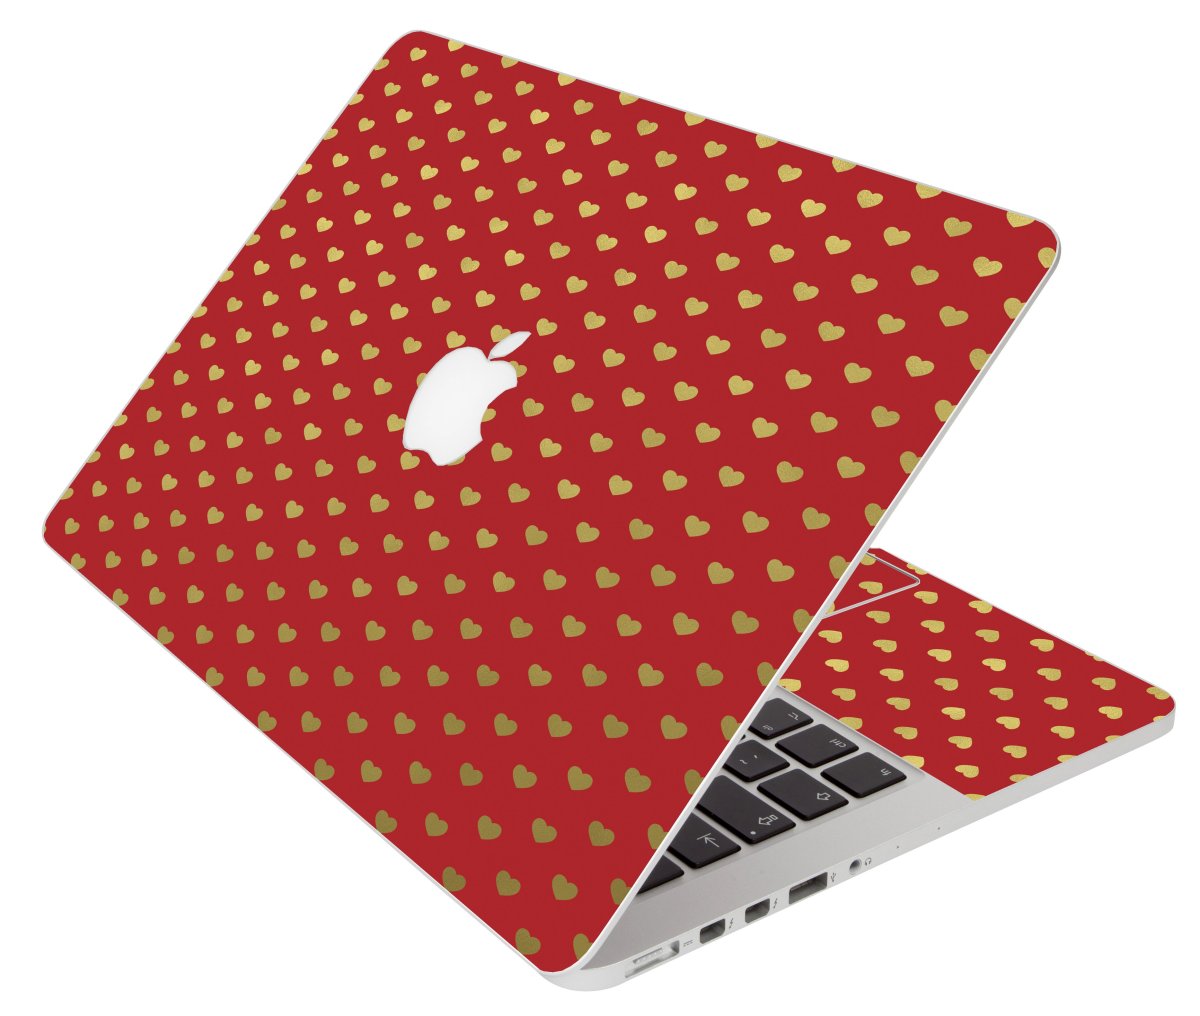 Red Gold Hearts Apple Macbook Air 11 A1370 Laptop Skin